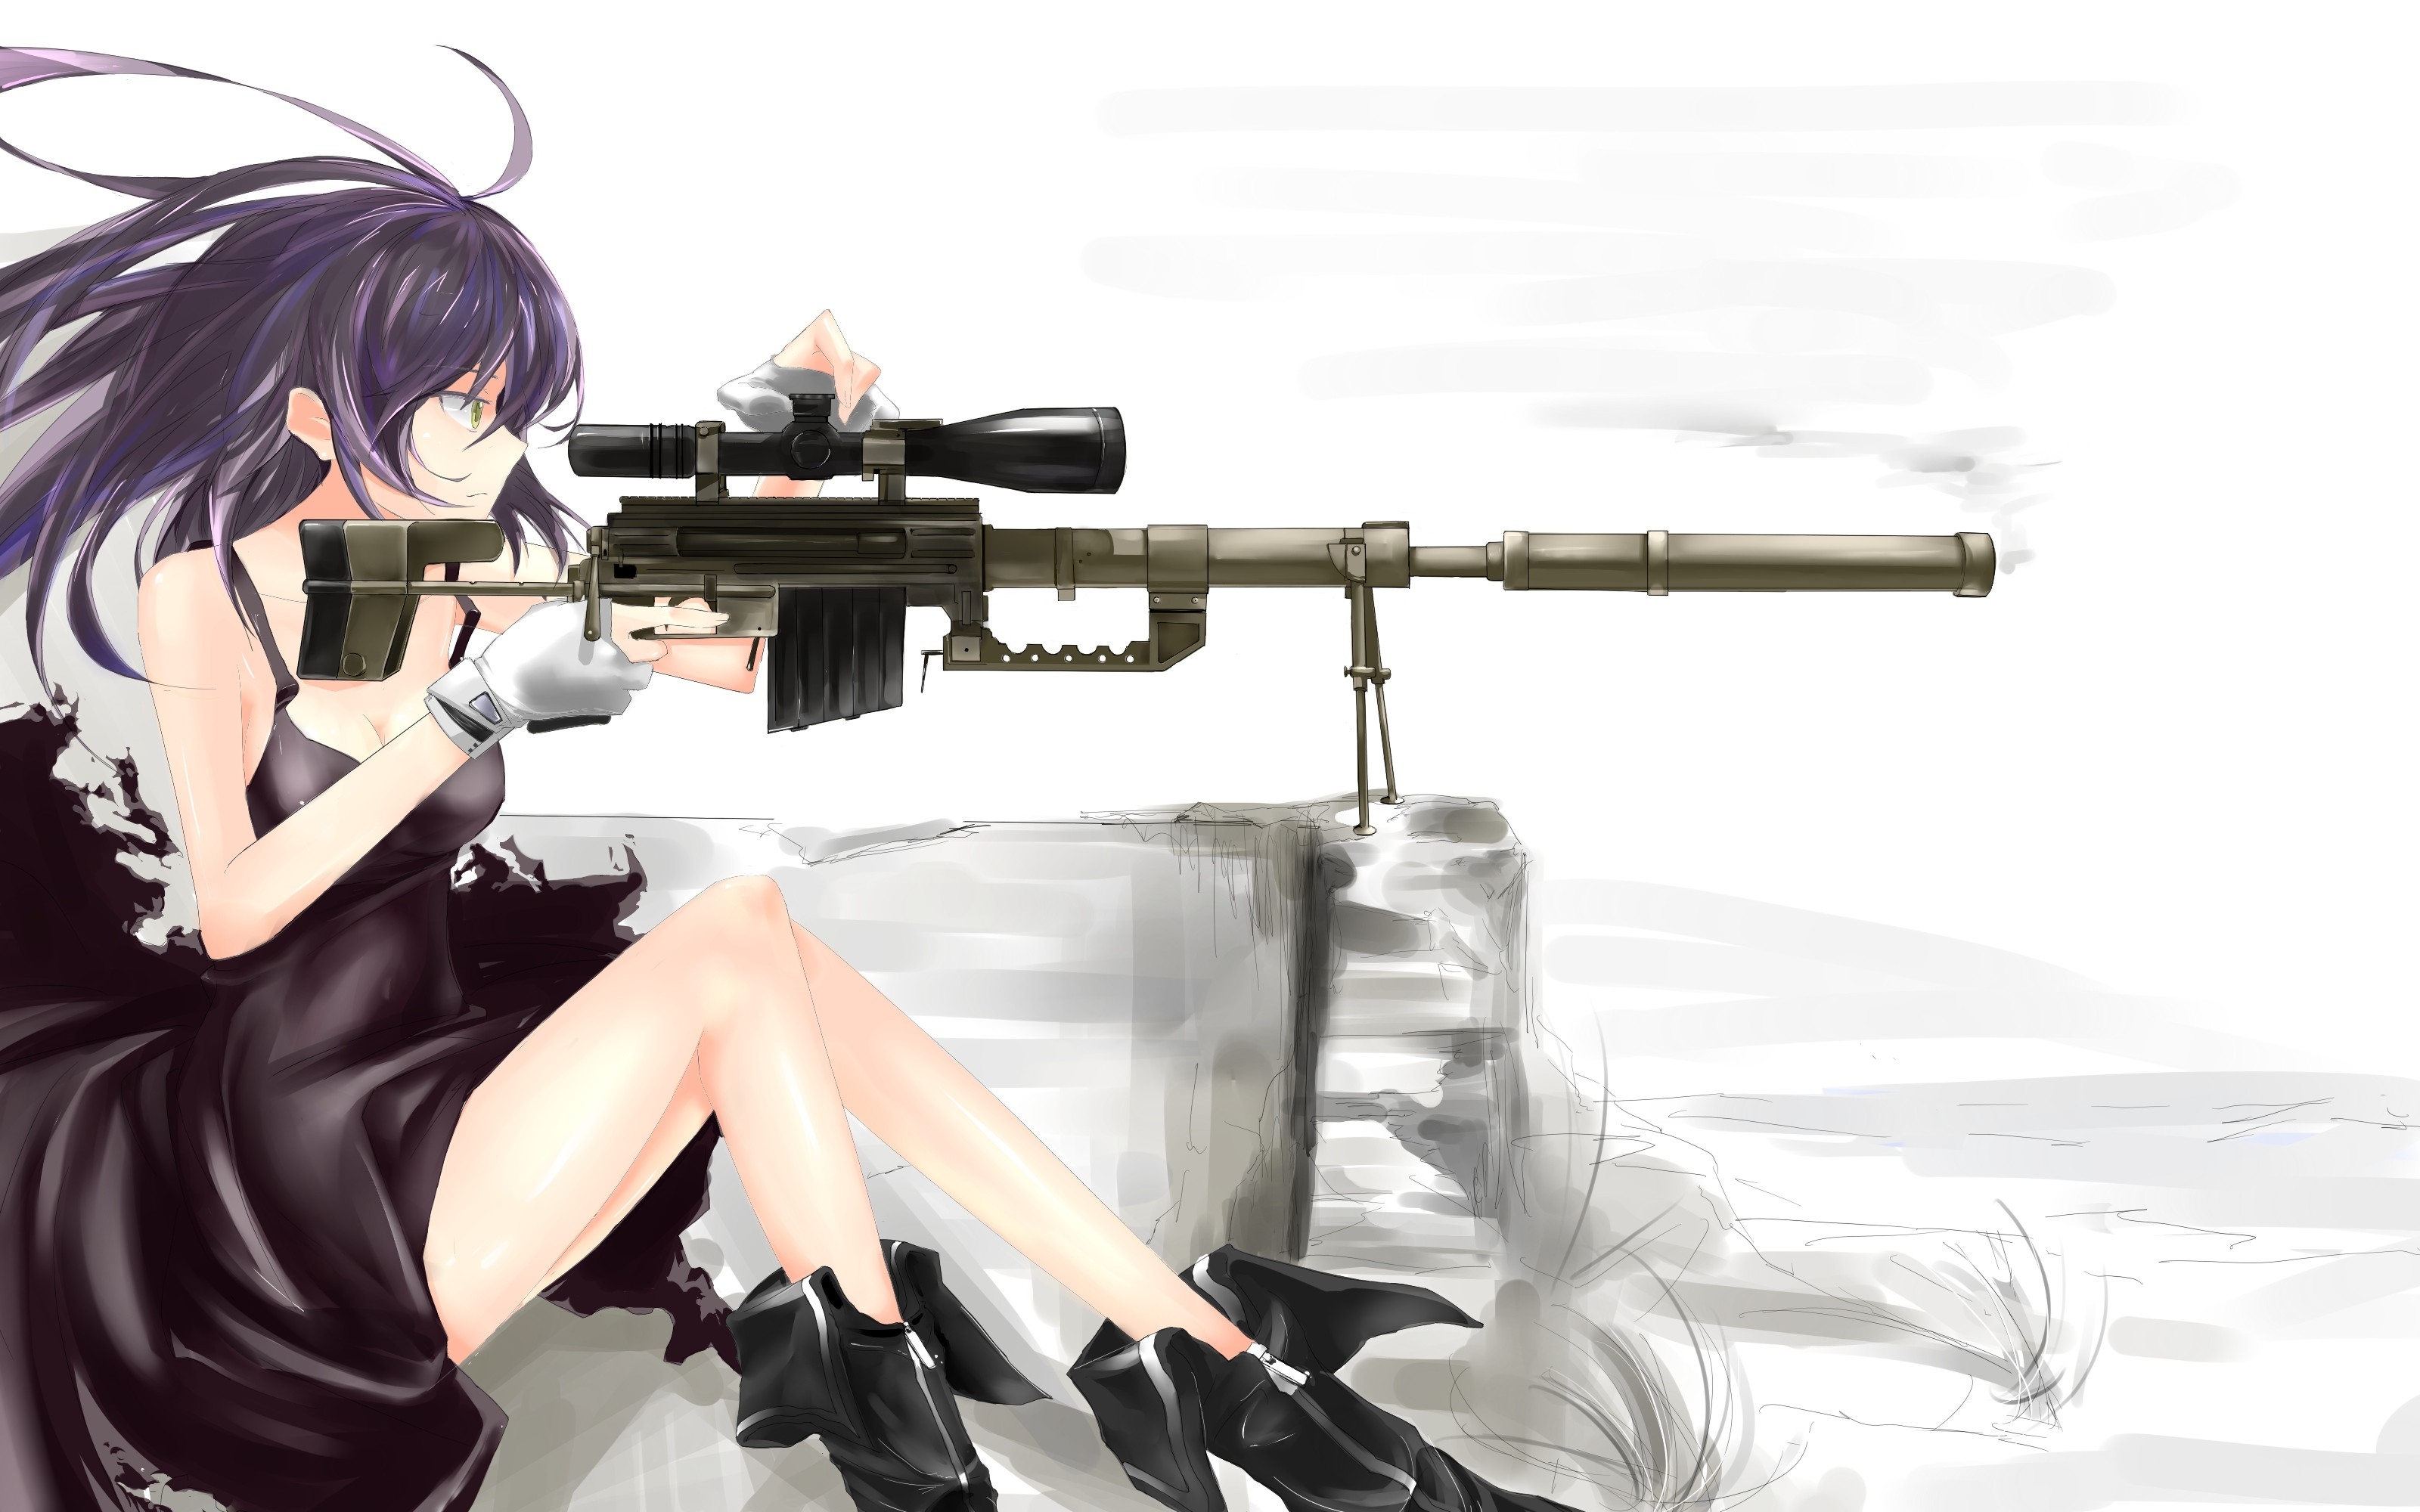 Boots gloves dress cleavage long hair weapons green eyes purple